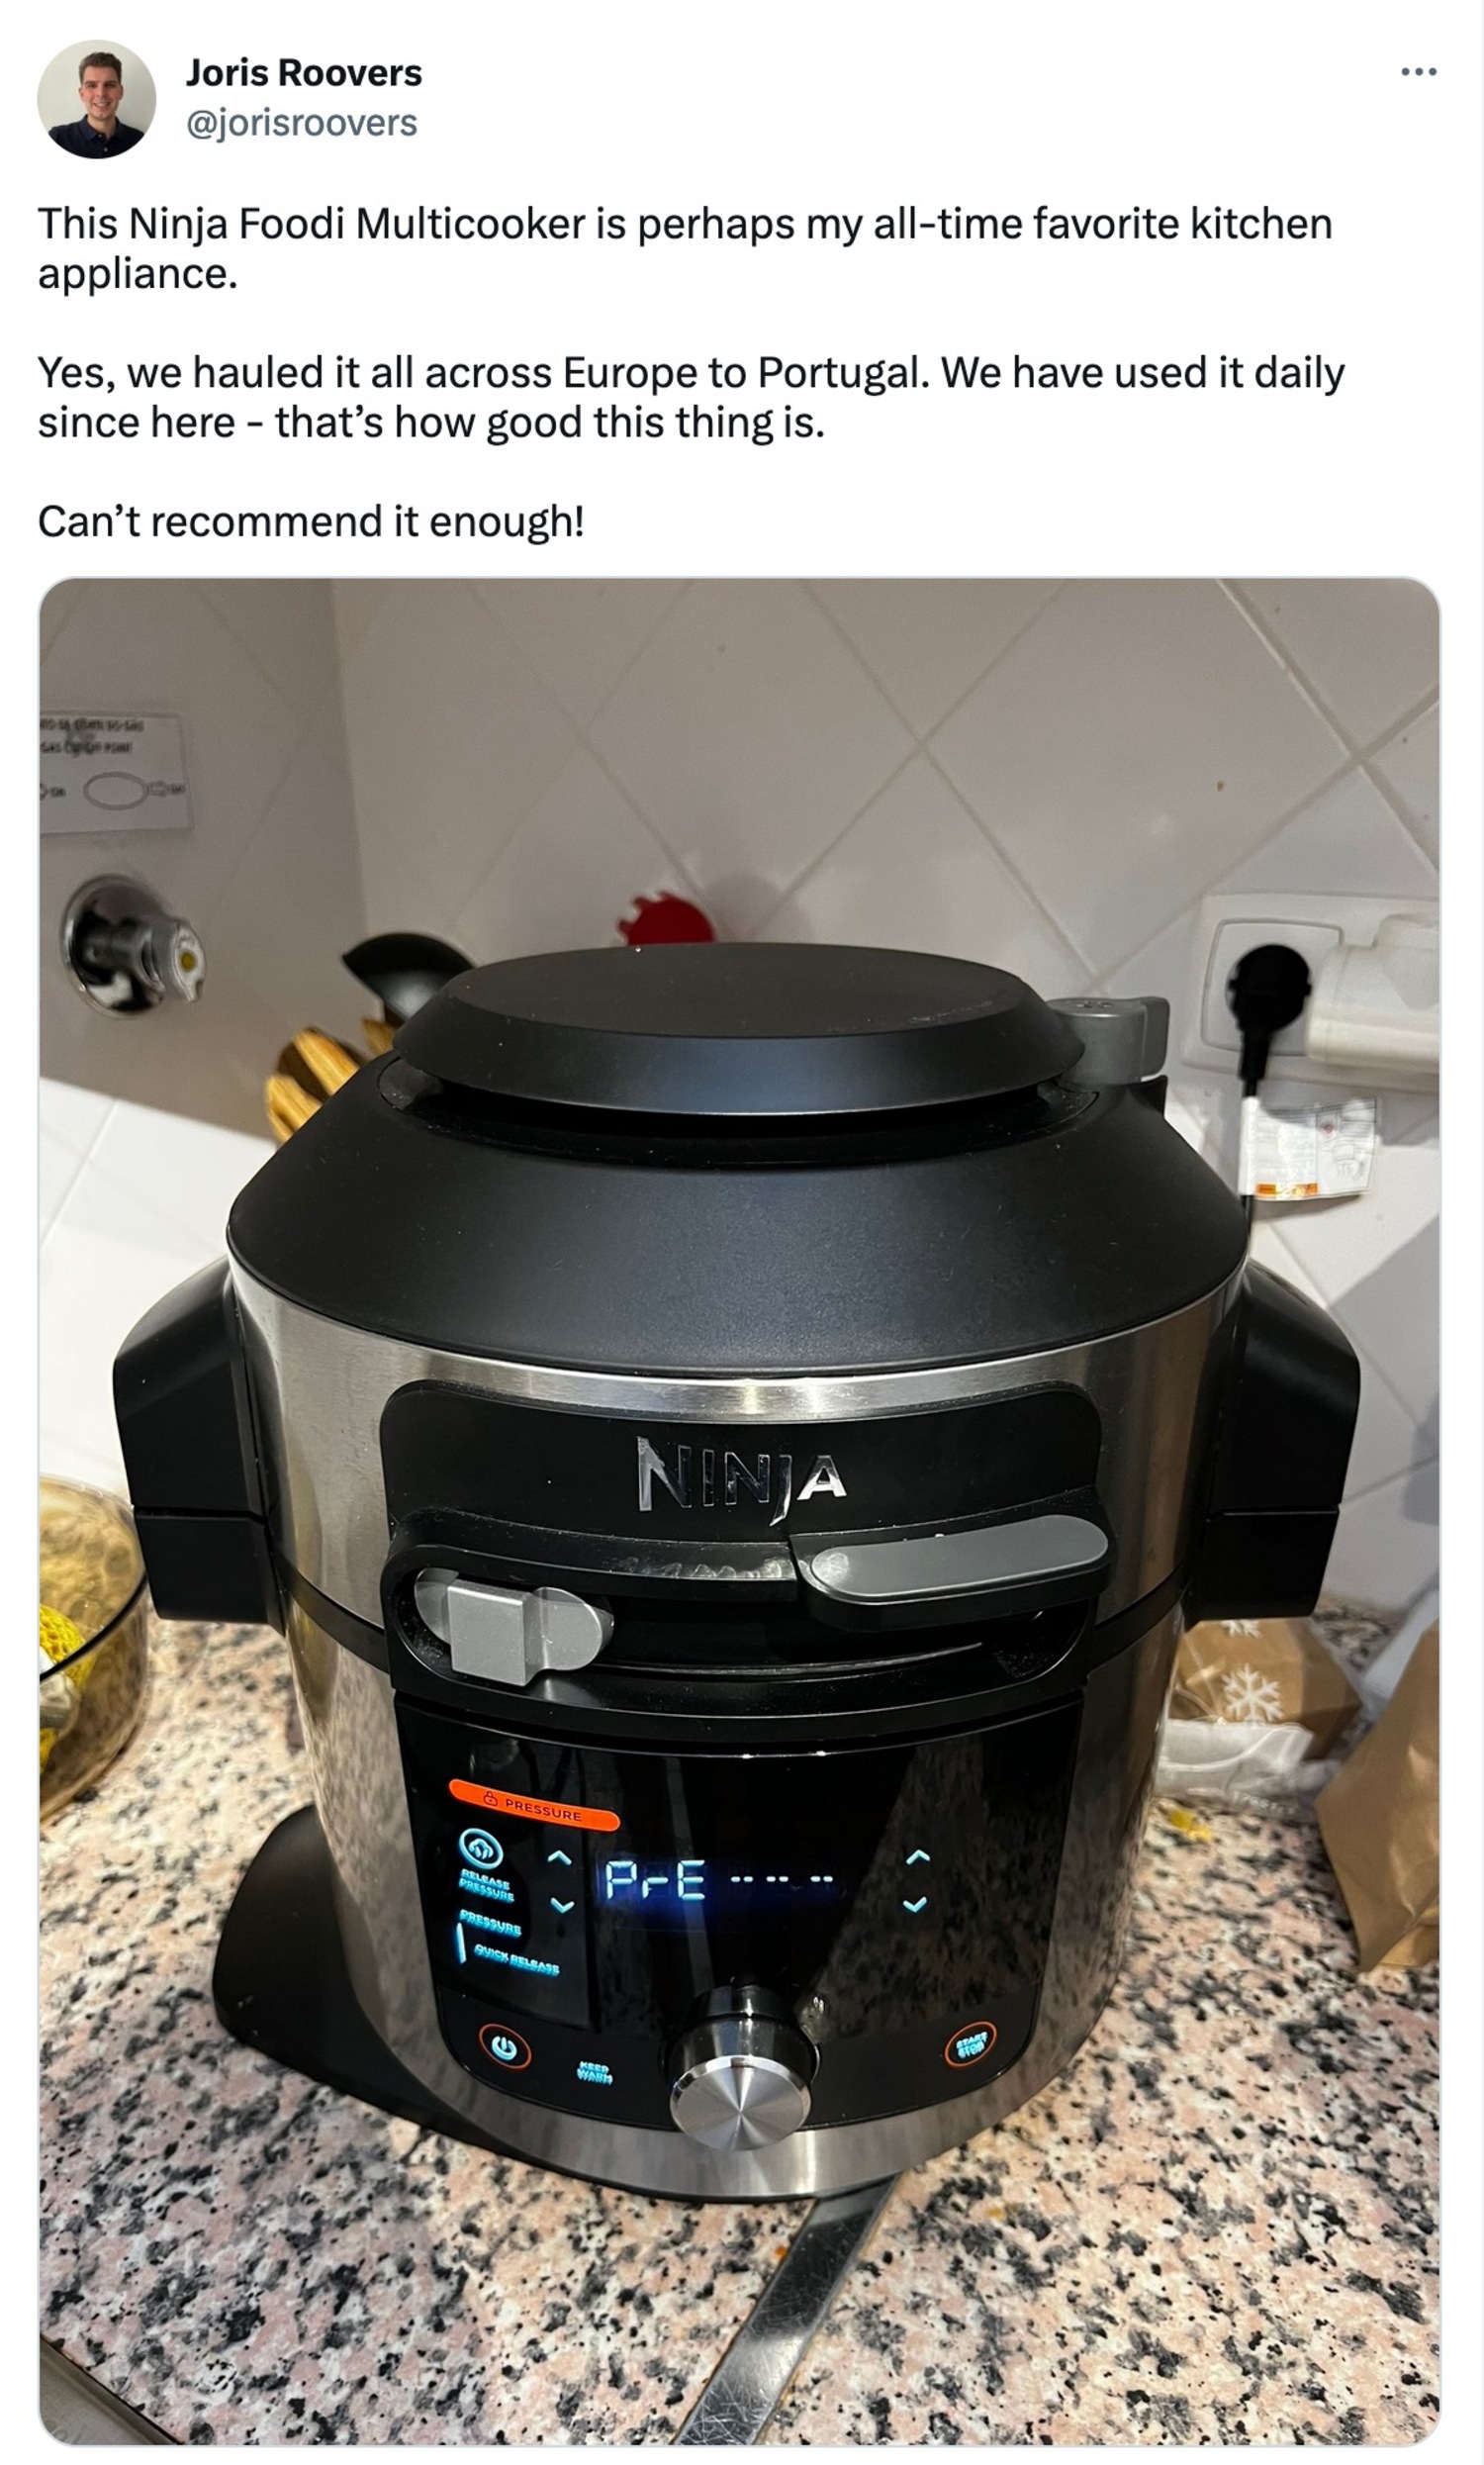 We were very happy we brought our **Ninja Foodi Multicooker** for daily cooking - highly recommended! Source: [Tweet](https://twitter.com/jorisroovers/status/1626264163113742336)